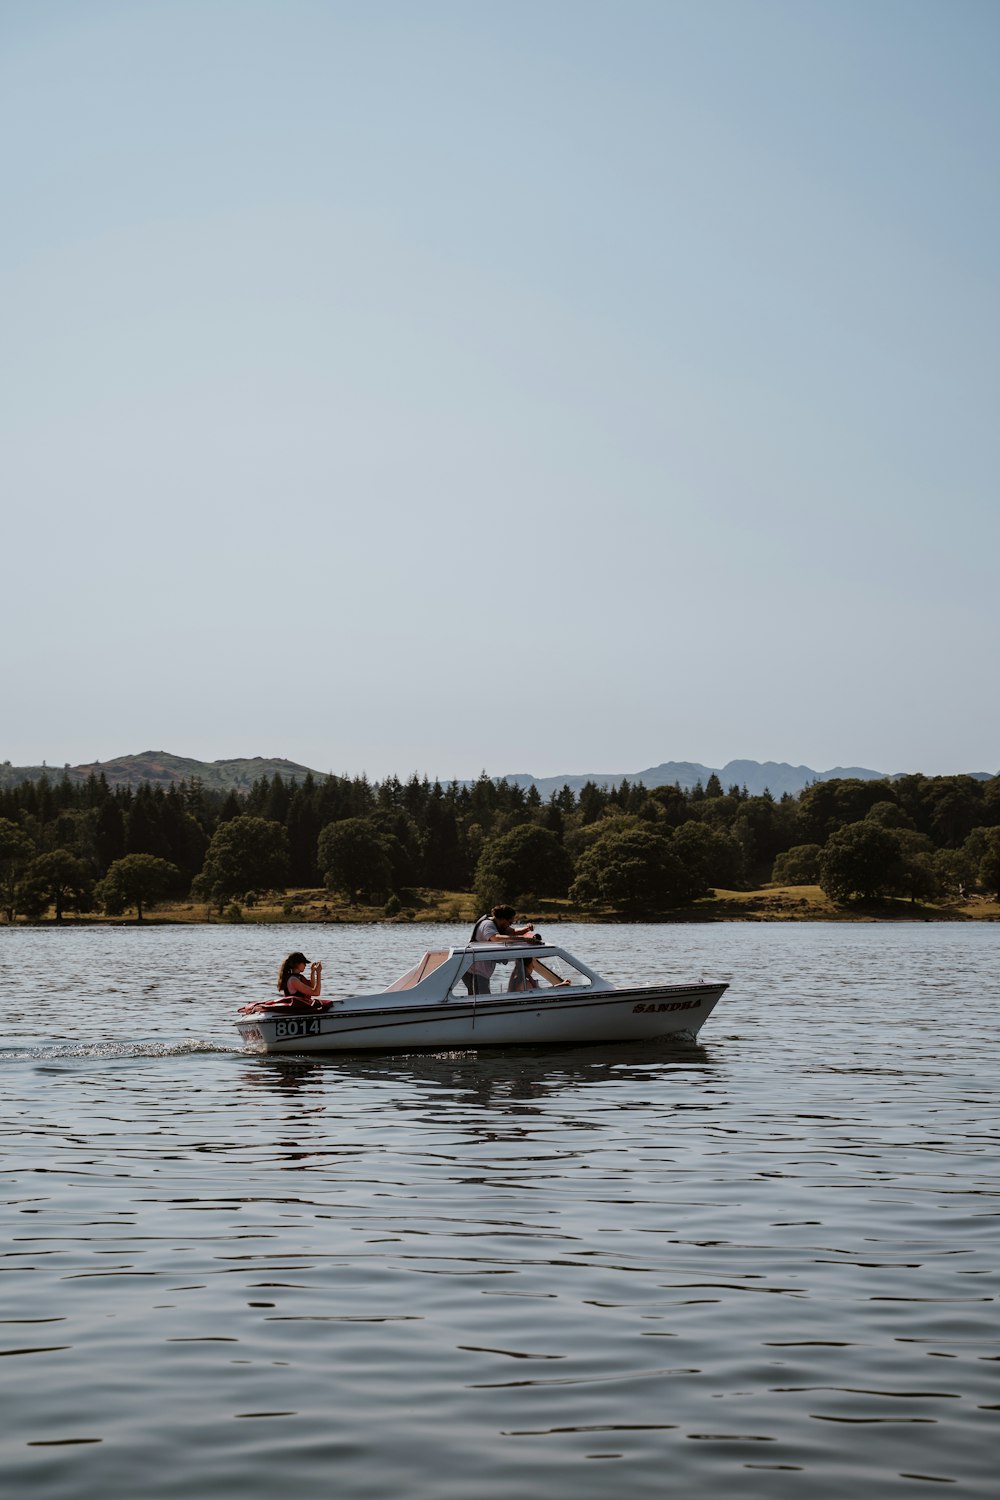 2 people riding on red and white boat on lake during daytime